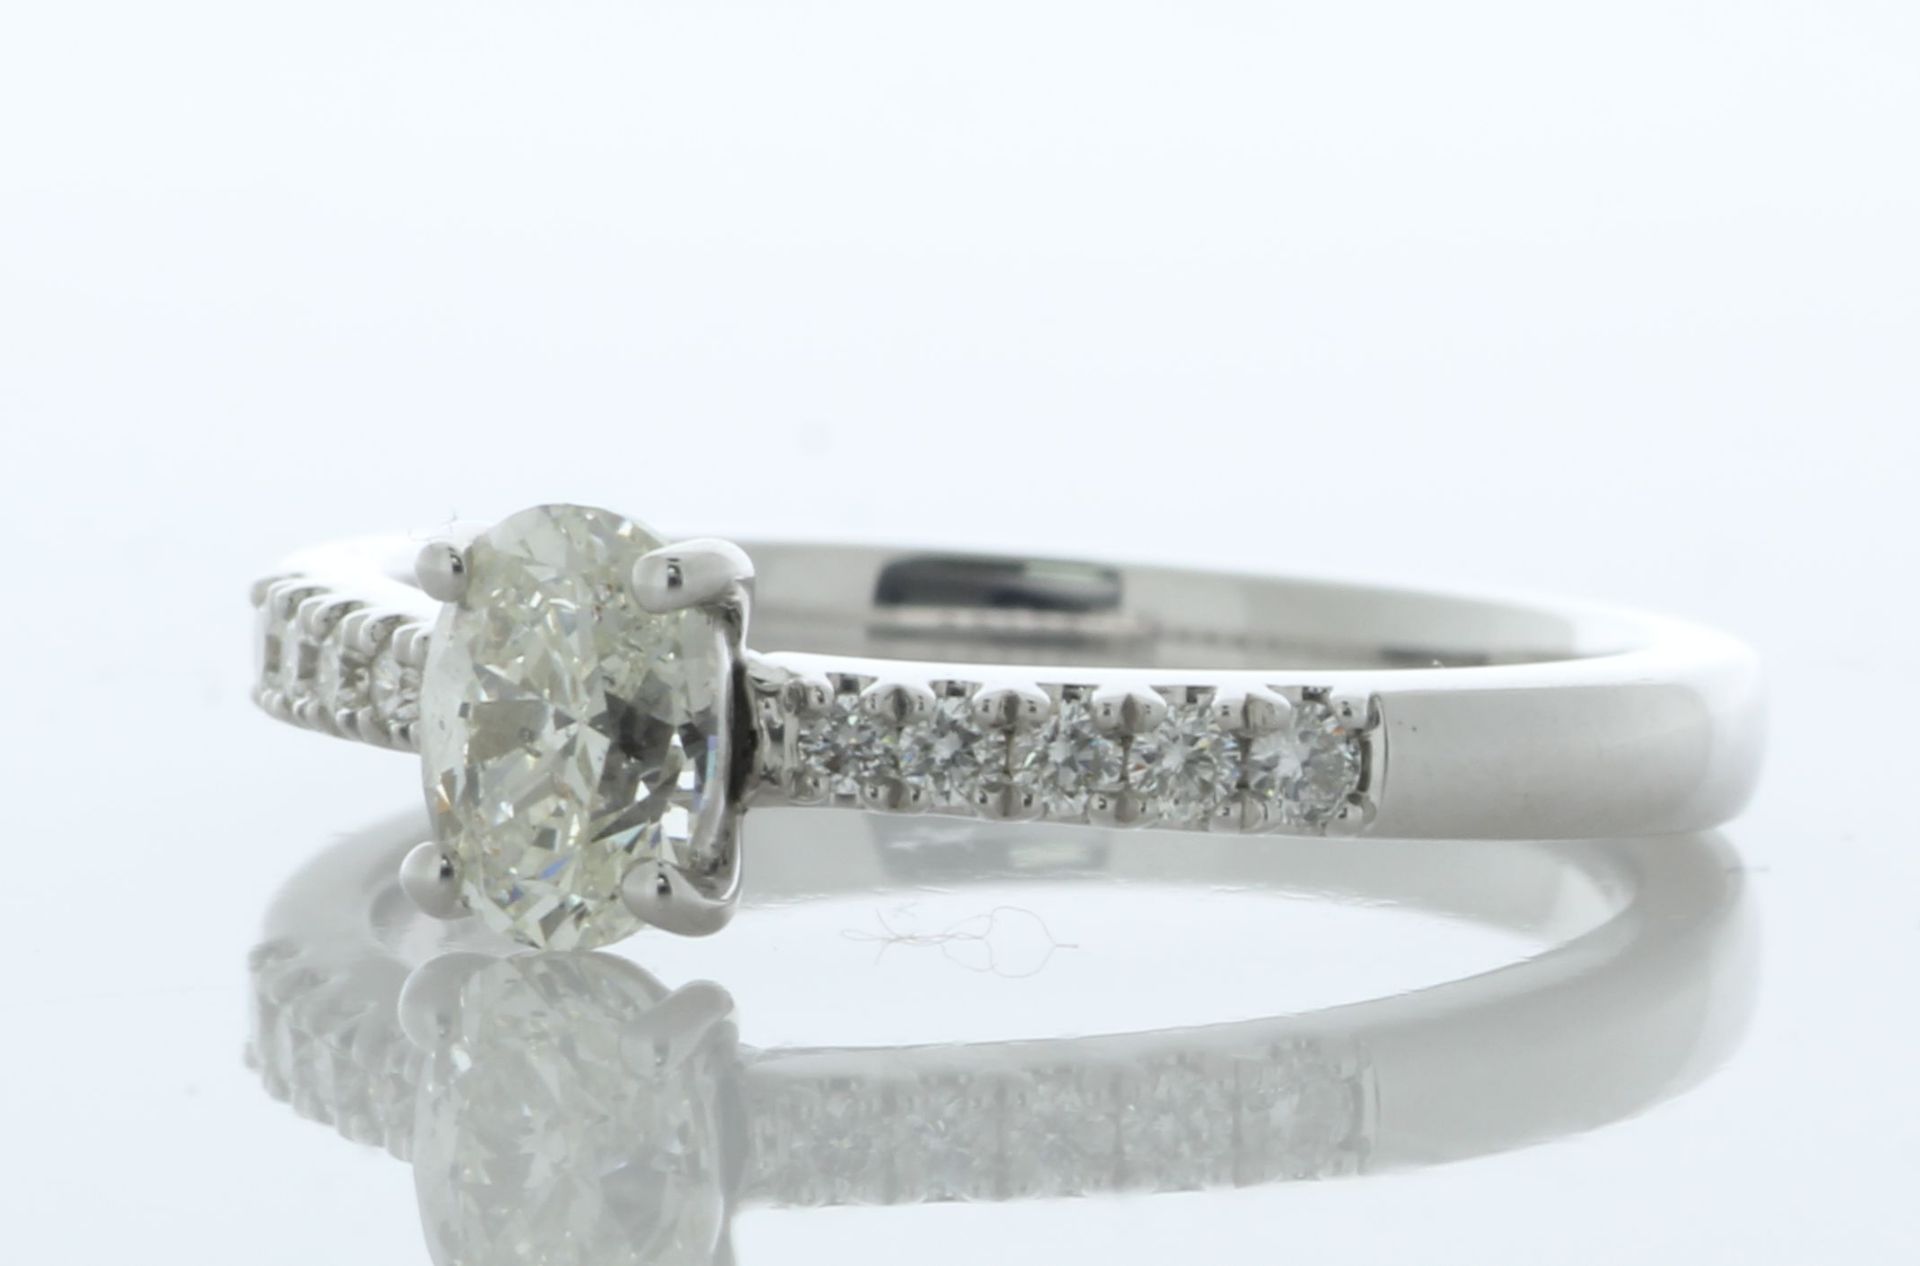 18ct White Gold Single Stone Marquise Cut Diamond Ring (0.52) 0.56 Carats - Valued By GIE £7,840. - Image 2 of 6